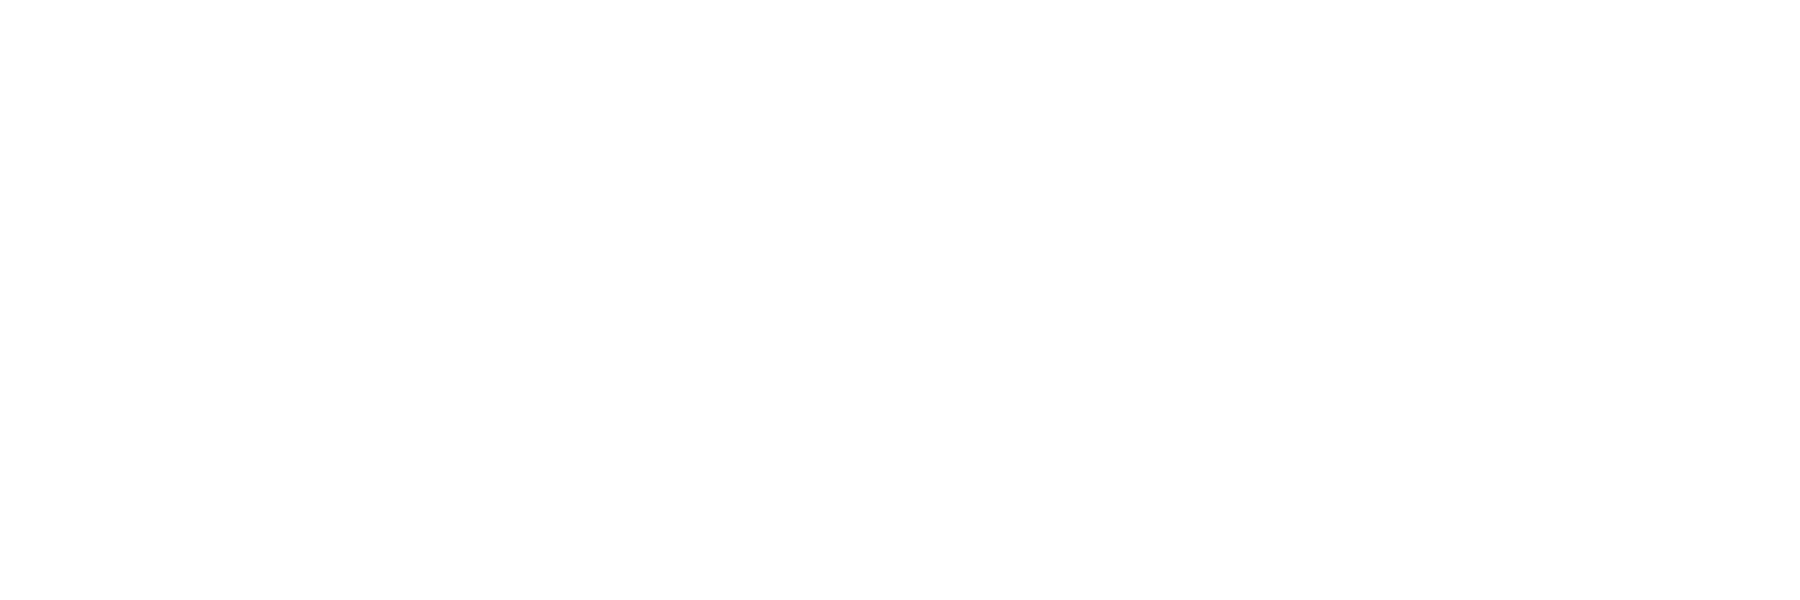 housing, apartments, commercial